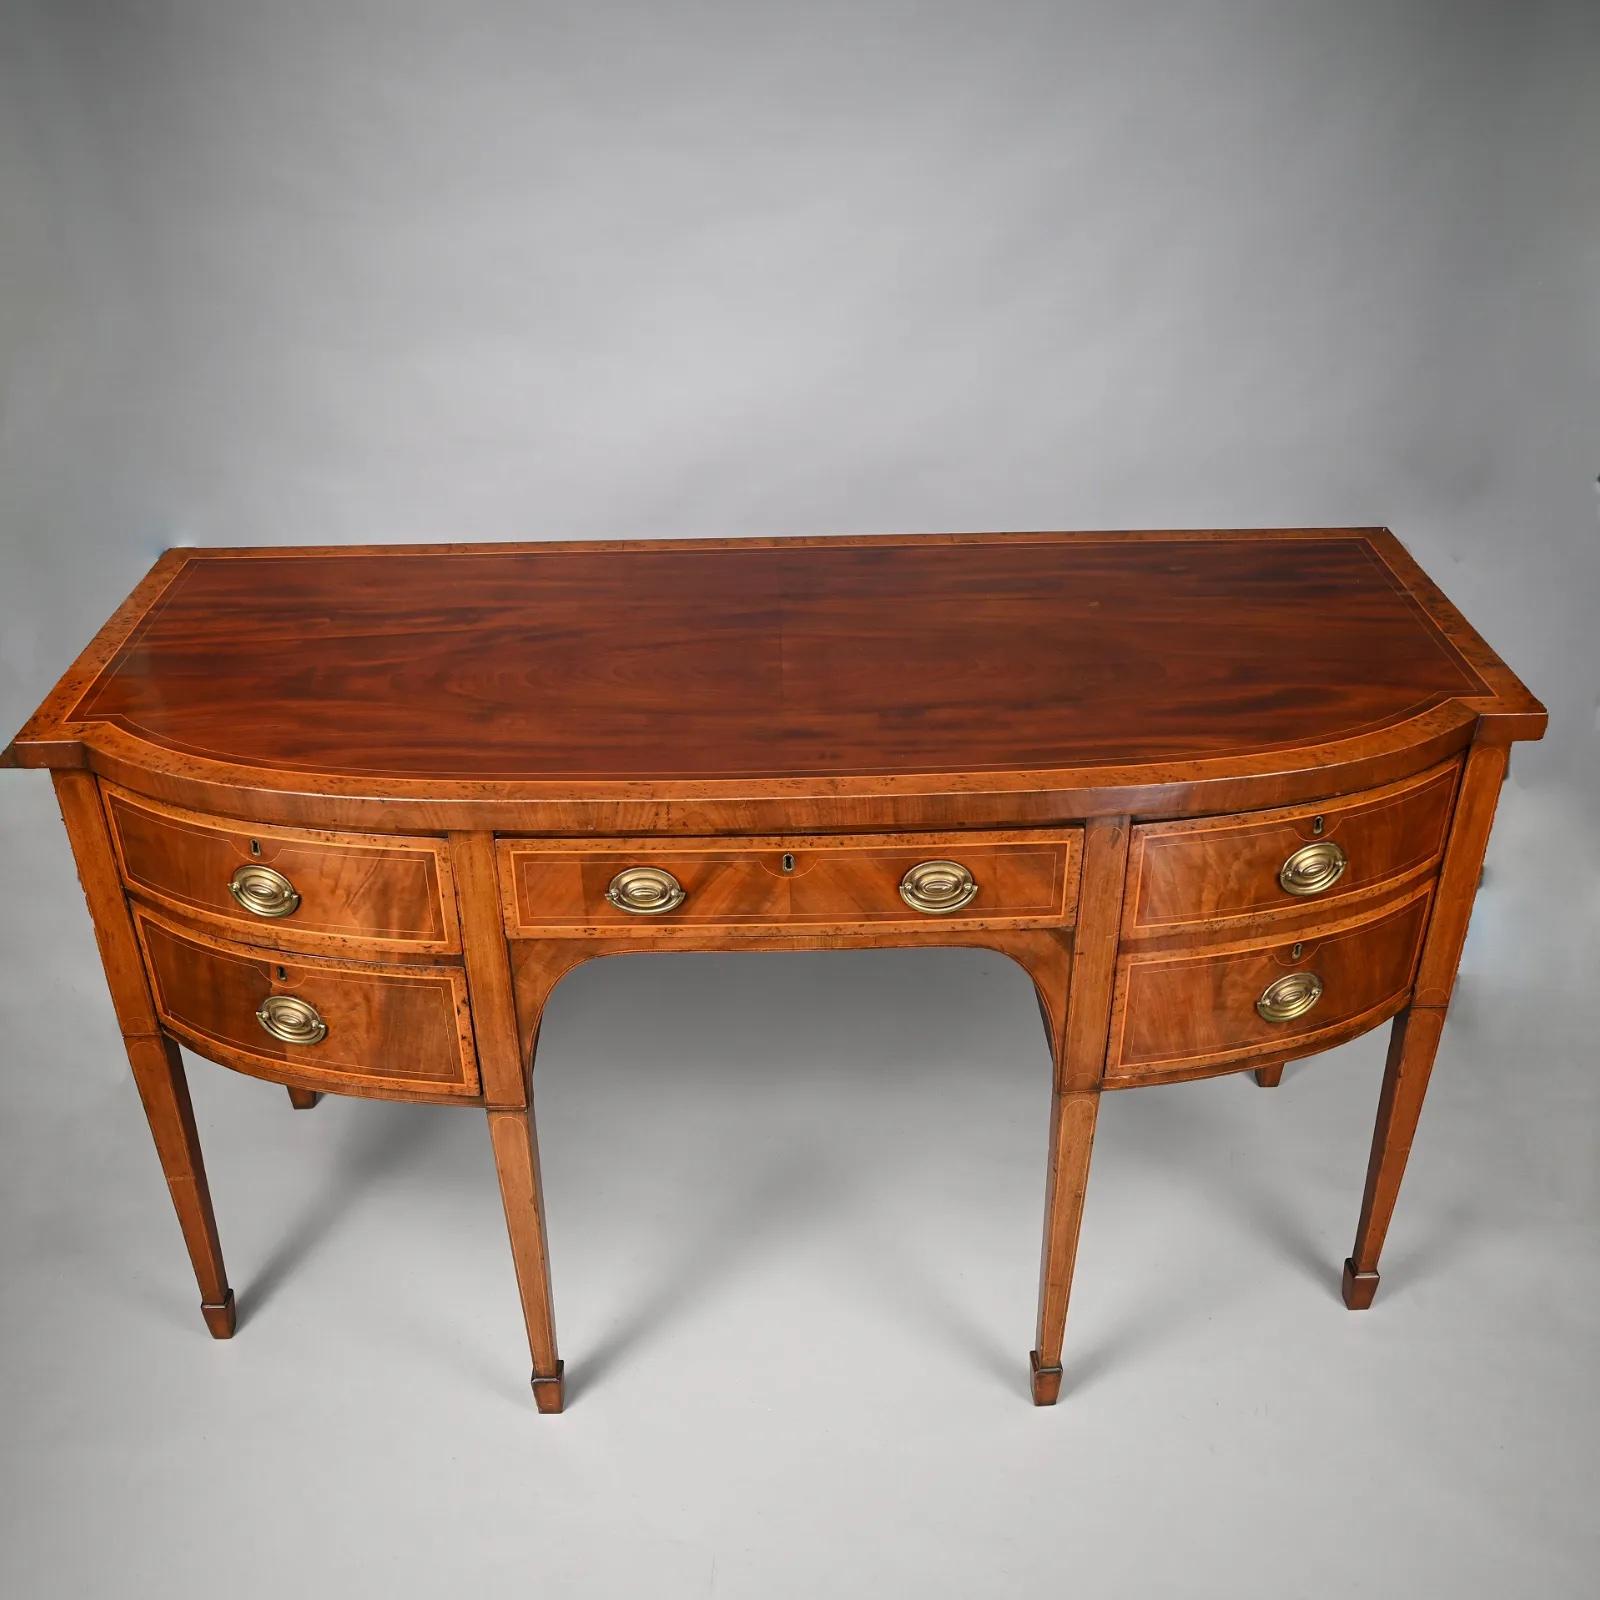 Fine period early 19th century Georgian Mahogany sideboard with original walnut burl inlay and satinwood. 
Beautiful color and natural patina. Early finish. Retains original metal lined wine cooling drawer.